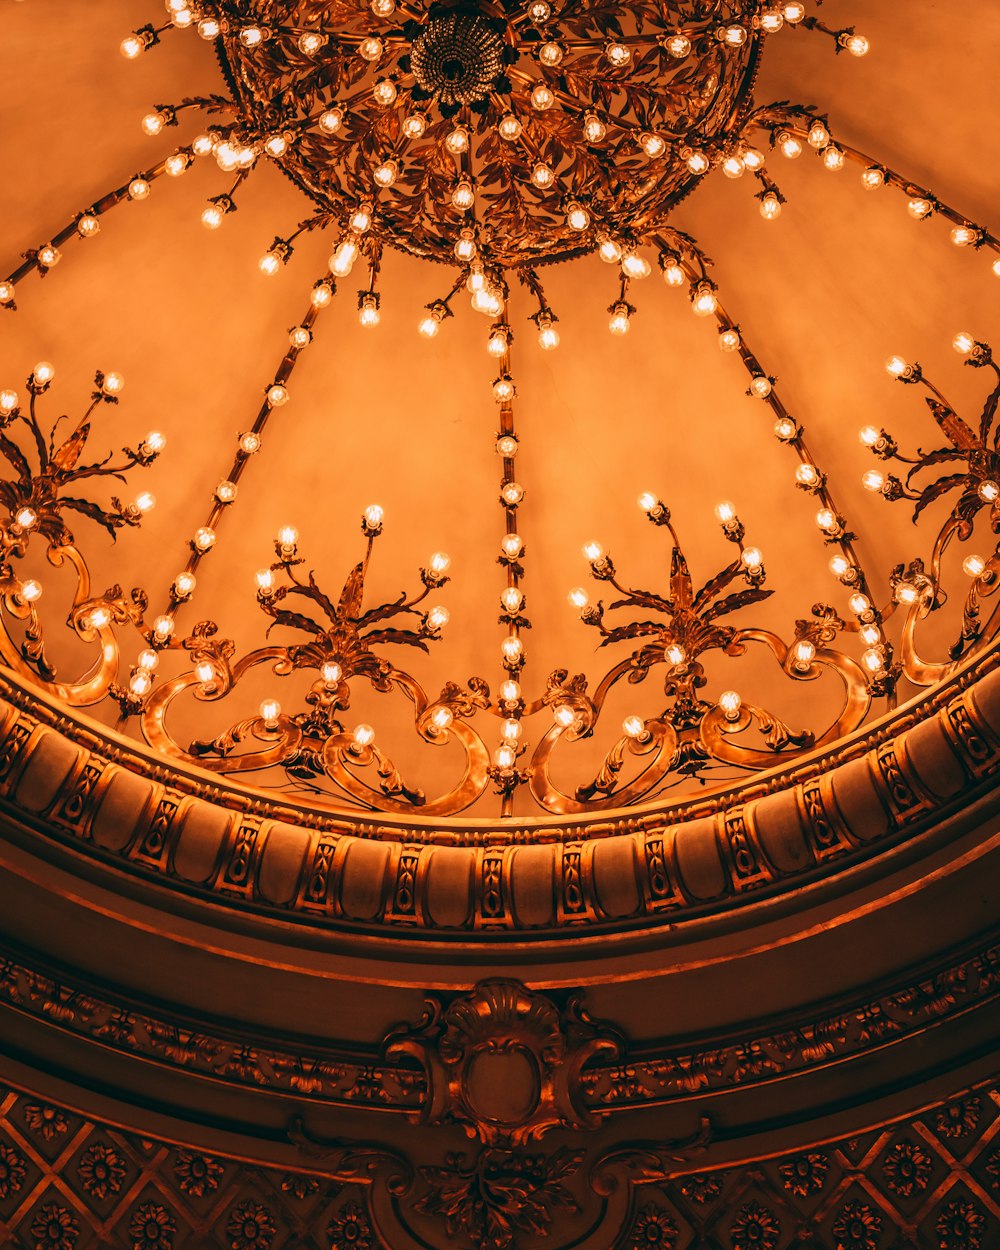 a chandelier in the middle of a domed room